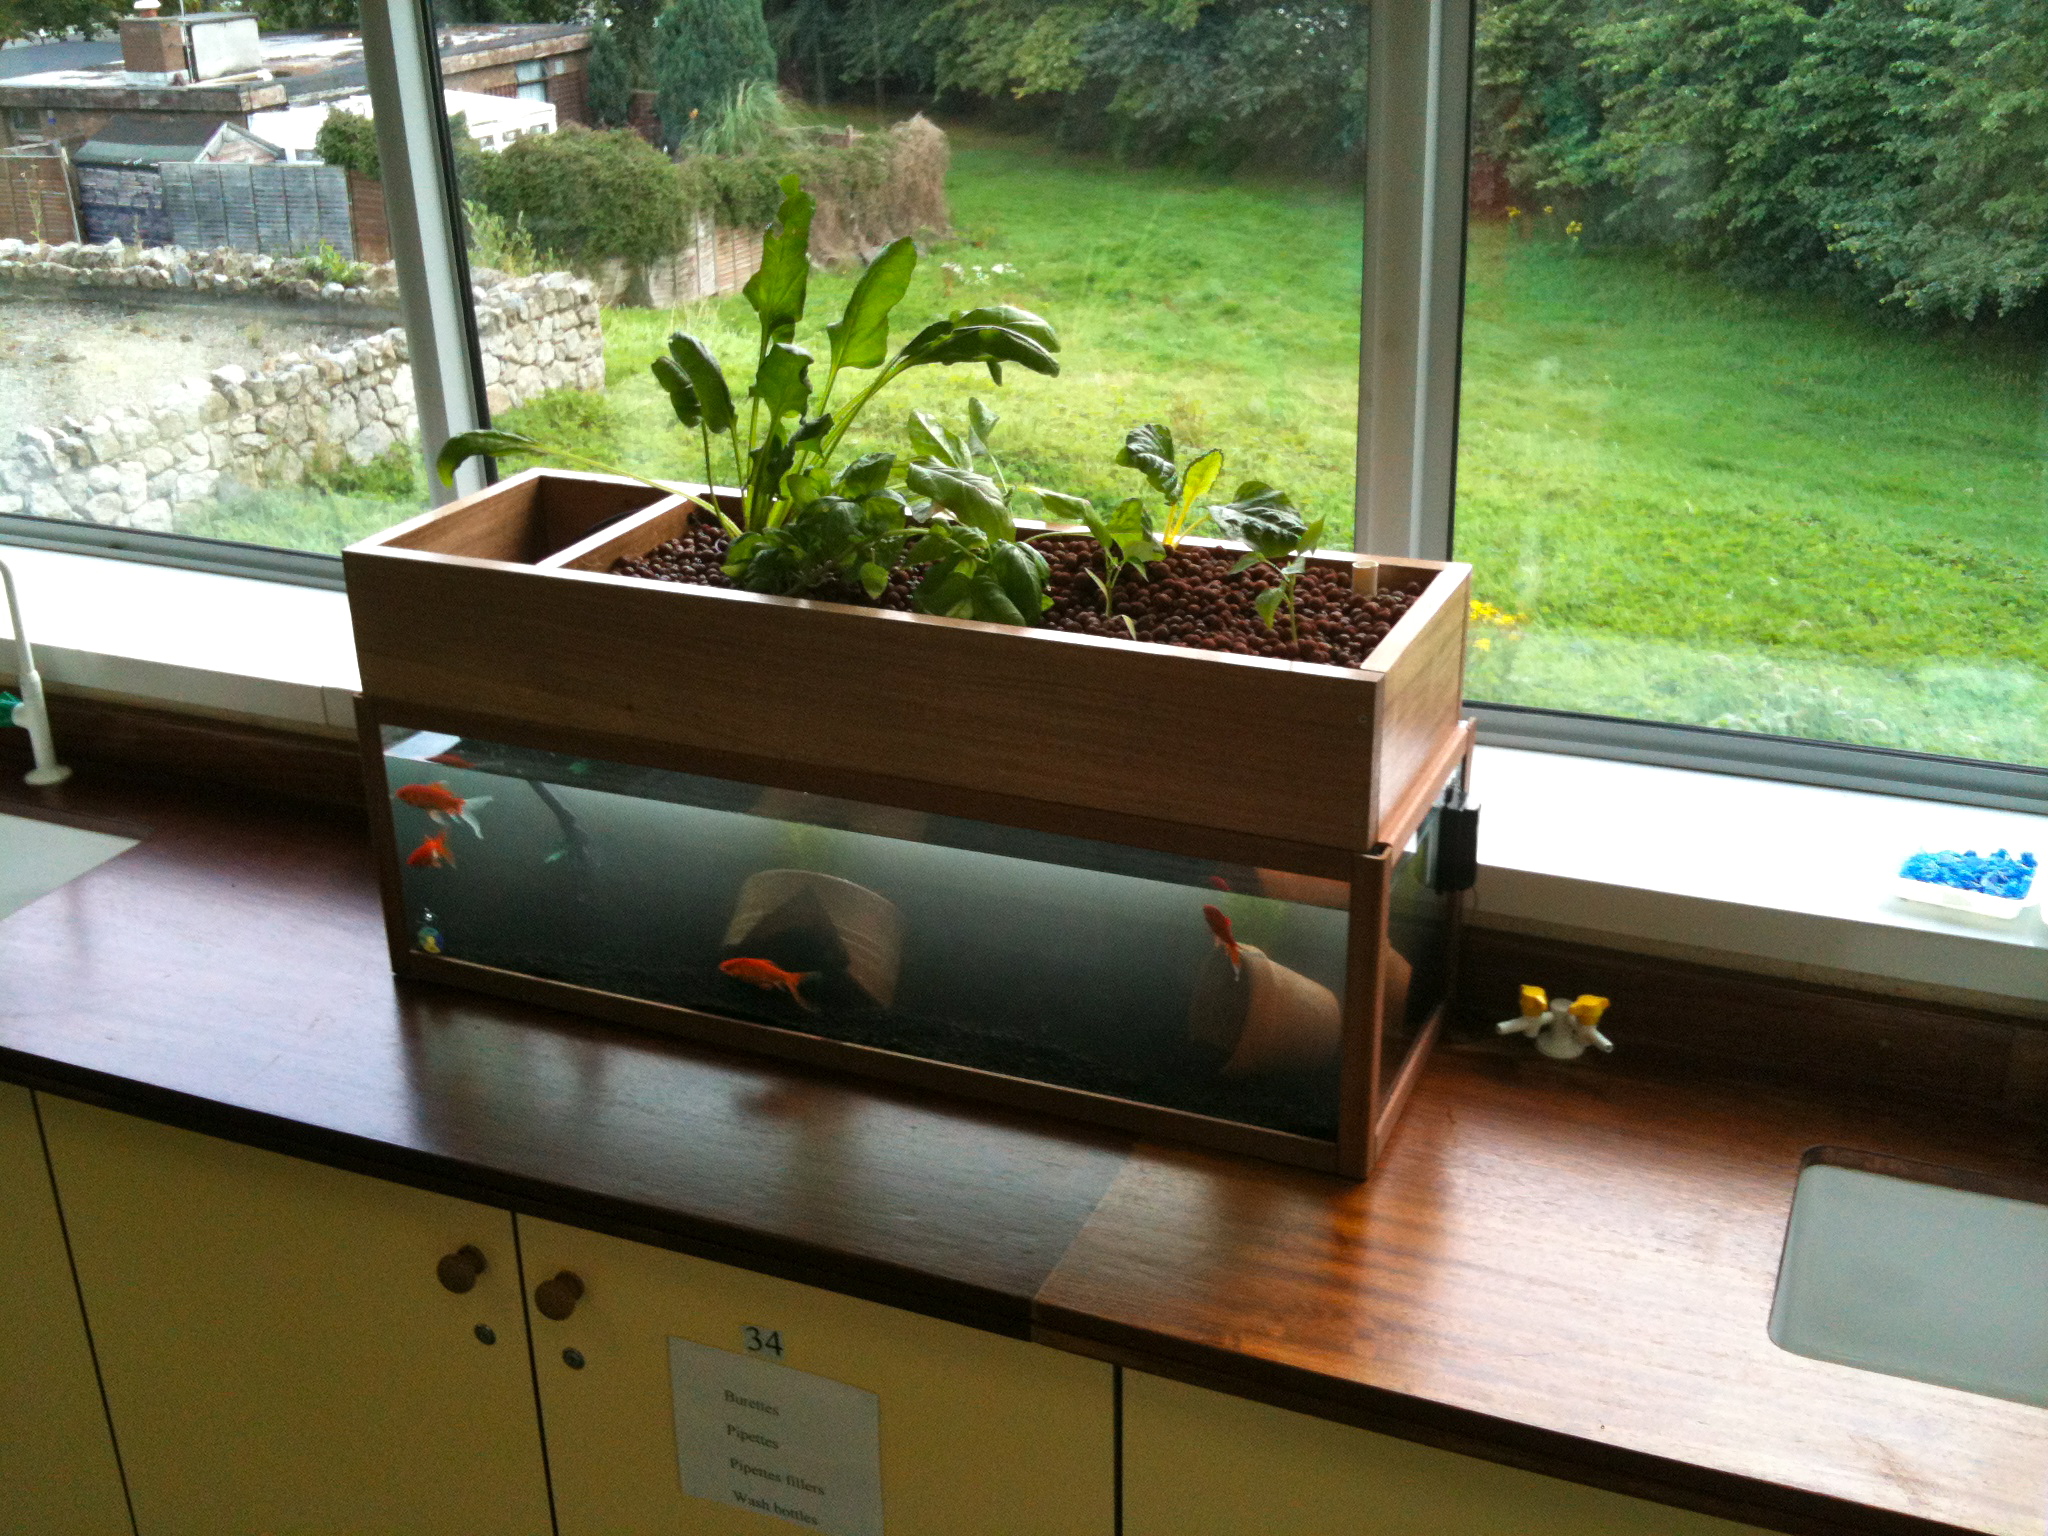 Aquaponics is a sustainable food production system. It is a 